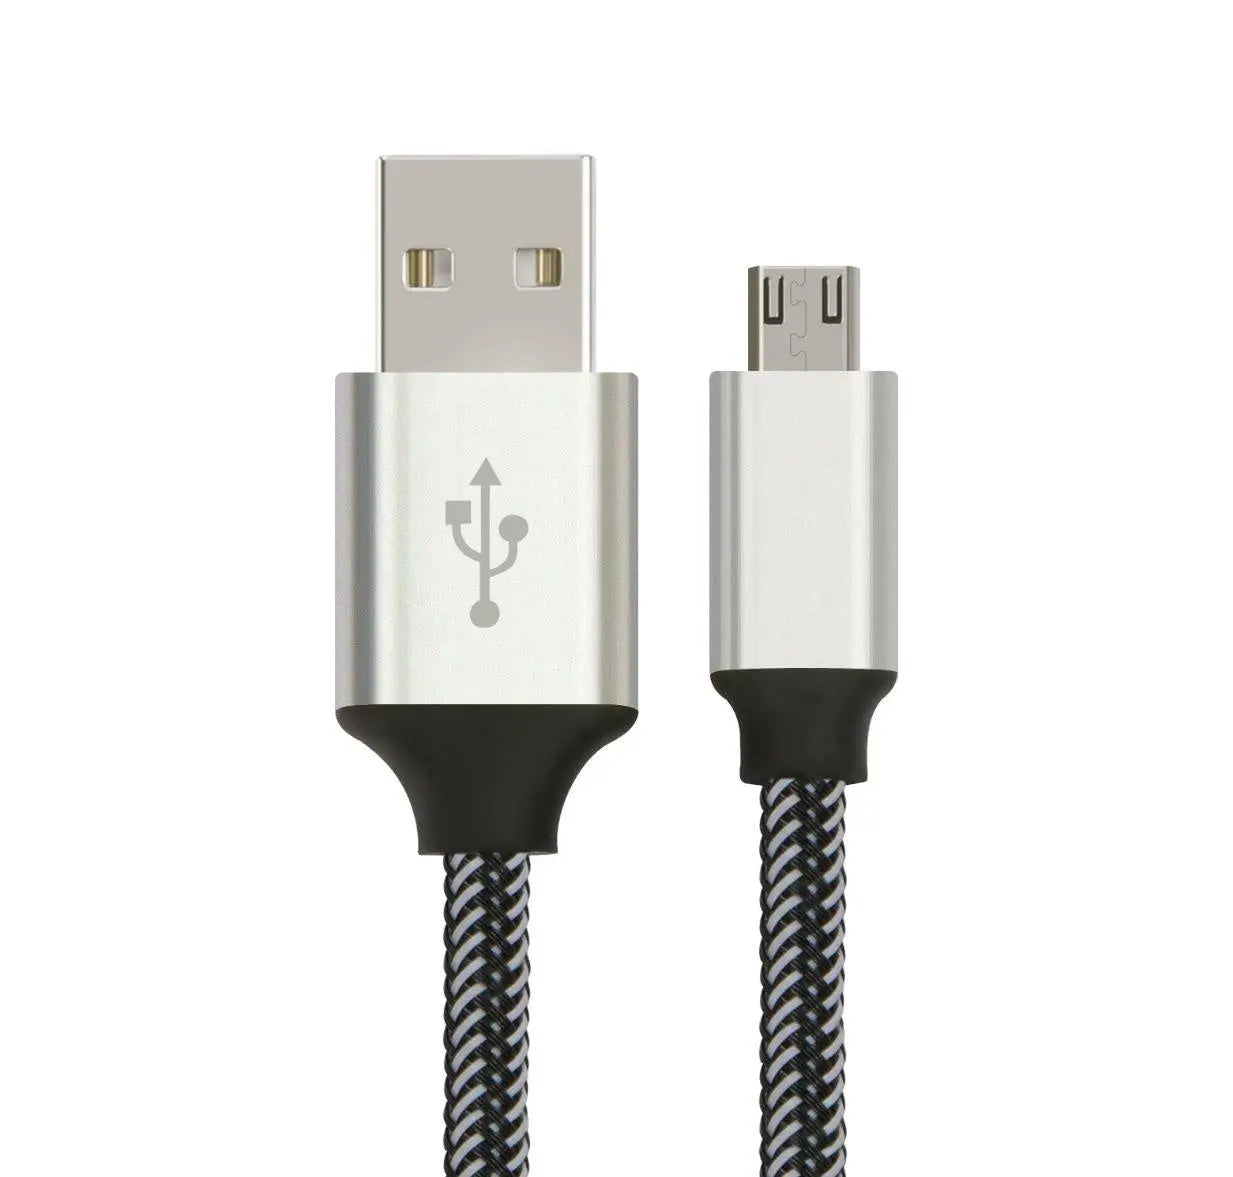 ASTROTEK 1m Micro USB Data Sync Charger Cable Cord Silver White Color for Samsung HTC Motorola Nokia Kndle Android Phone Tablet & Devices ASTROTEK